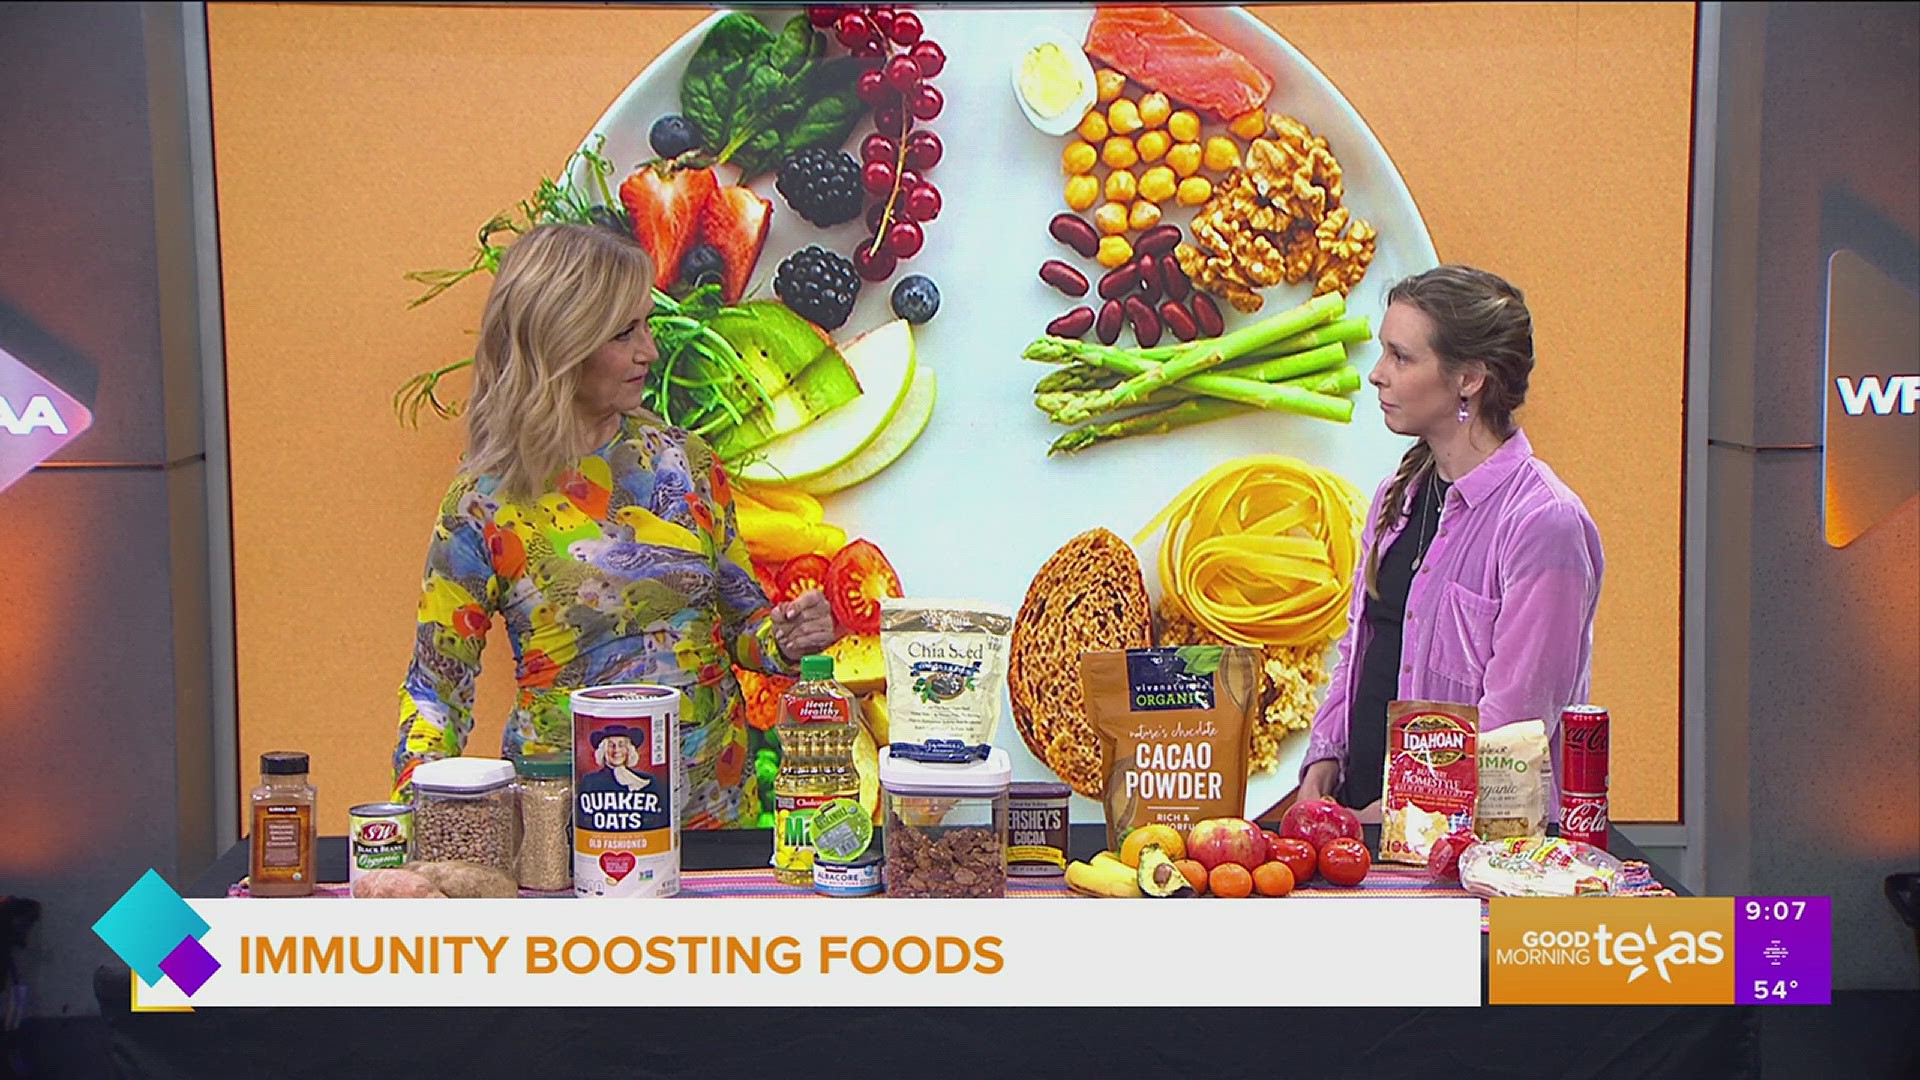 Registered dietitian Maggy Doherty shares how an anti-inflammatory diet can help boost your immunity. Go to dohertynutrition.com for more information.